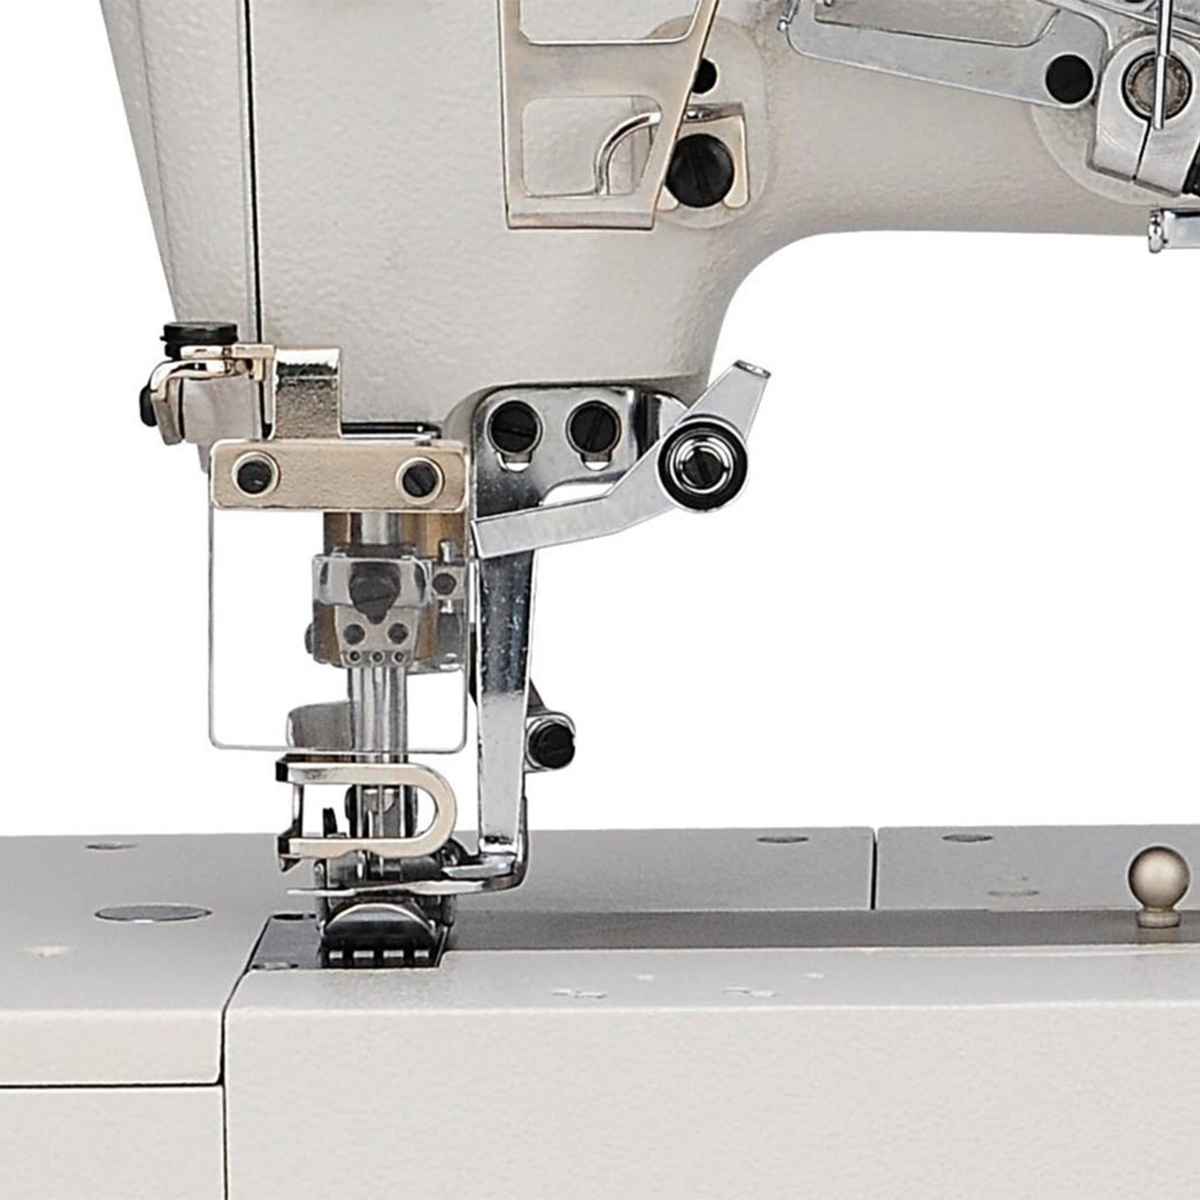 SINGER 522D-356-03TB 3 Needle Flatbed Coverstitch for Binding Industrial Sewing Machine Assembled with Servo Motor, Table and Stand Included